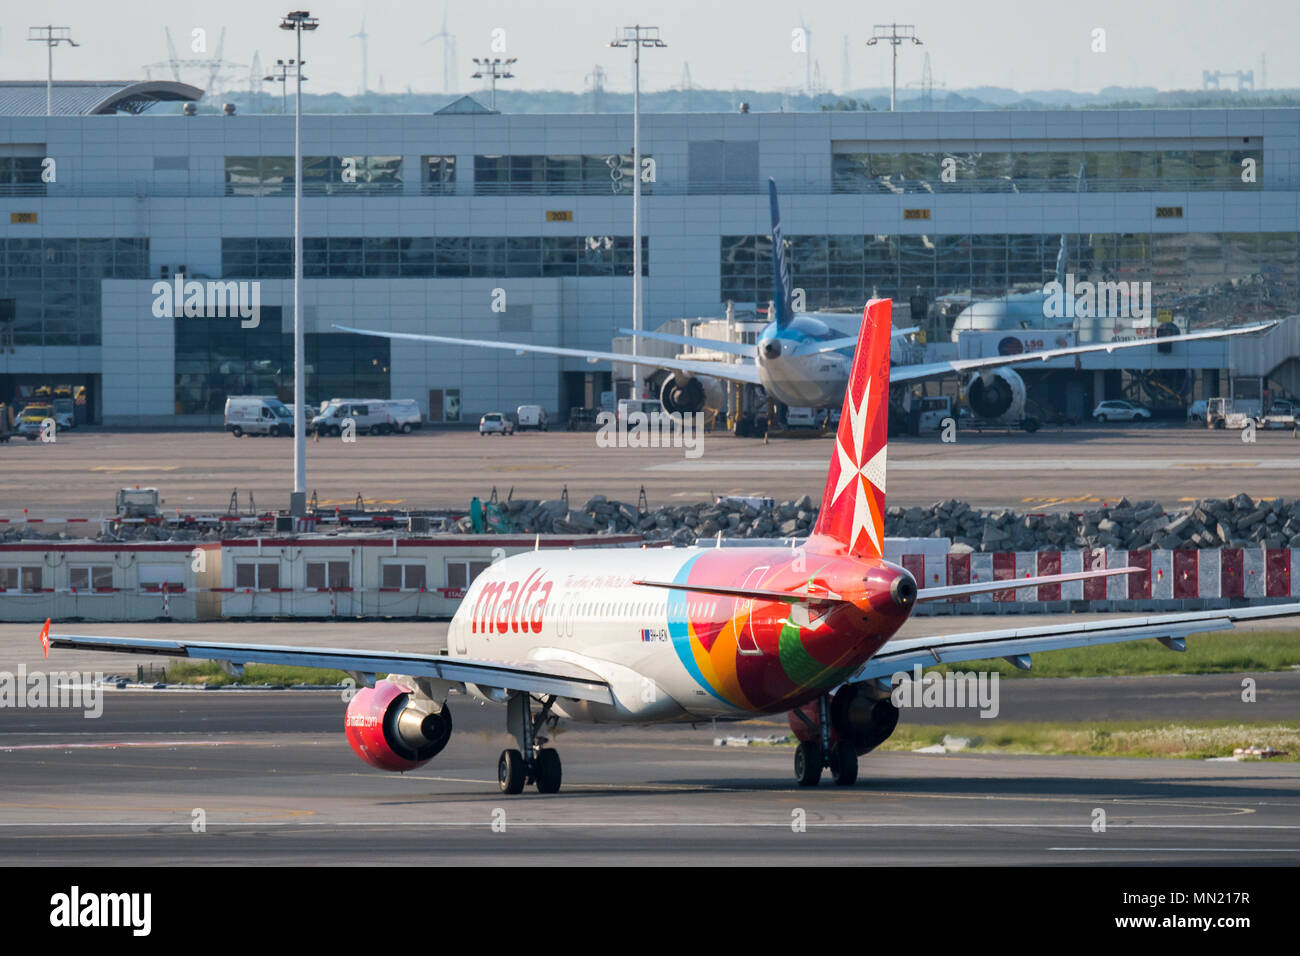 Airbus A320-214, narrow-body, commercial passenger twin-engine jet airliner from Air Malta at Brussels Airport, Zaventem, Belgium Stock Photo